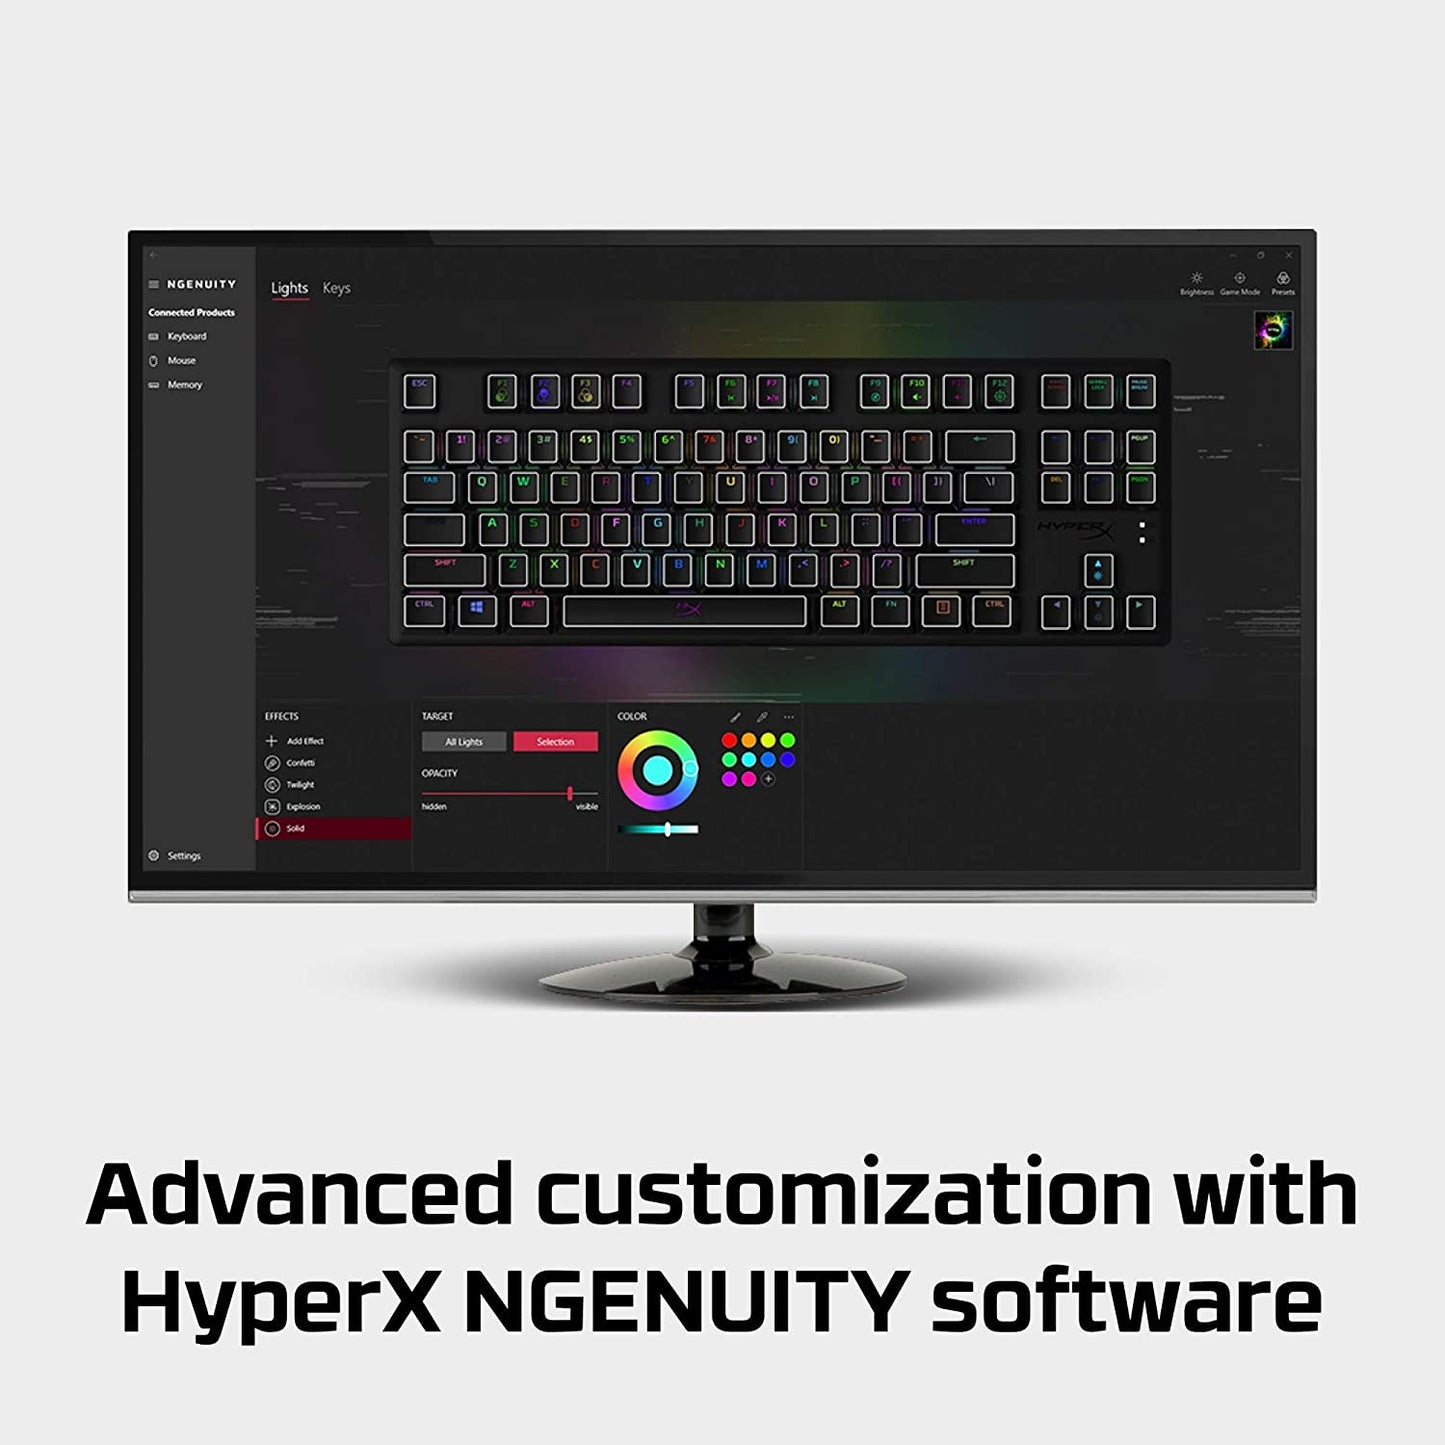 HyperX Alloy Origins Core Tenkeyless Mechanical RGB Backlit Gaming Keyboard with Detachable USB Type-C Cable, Aqua Tactile Switch (HX-KB7AQX-US)